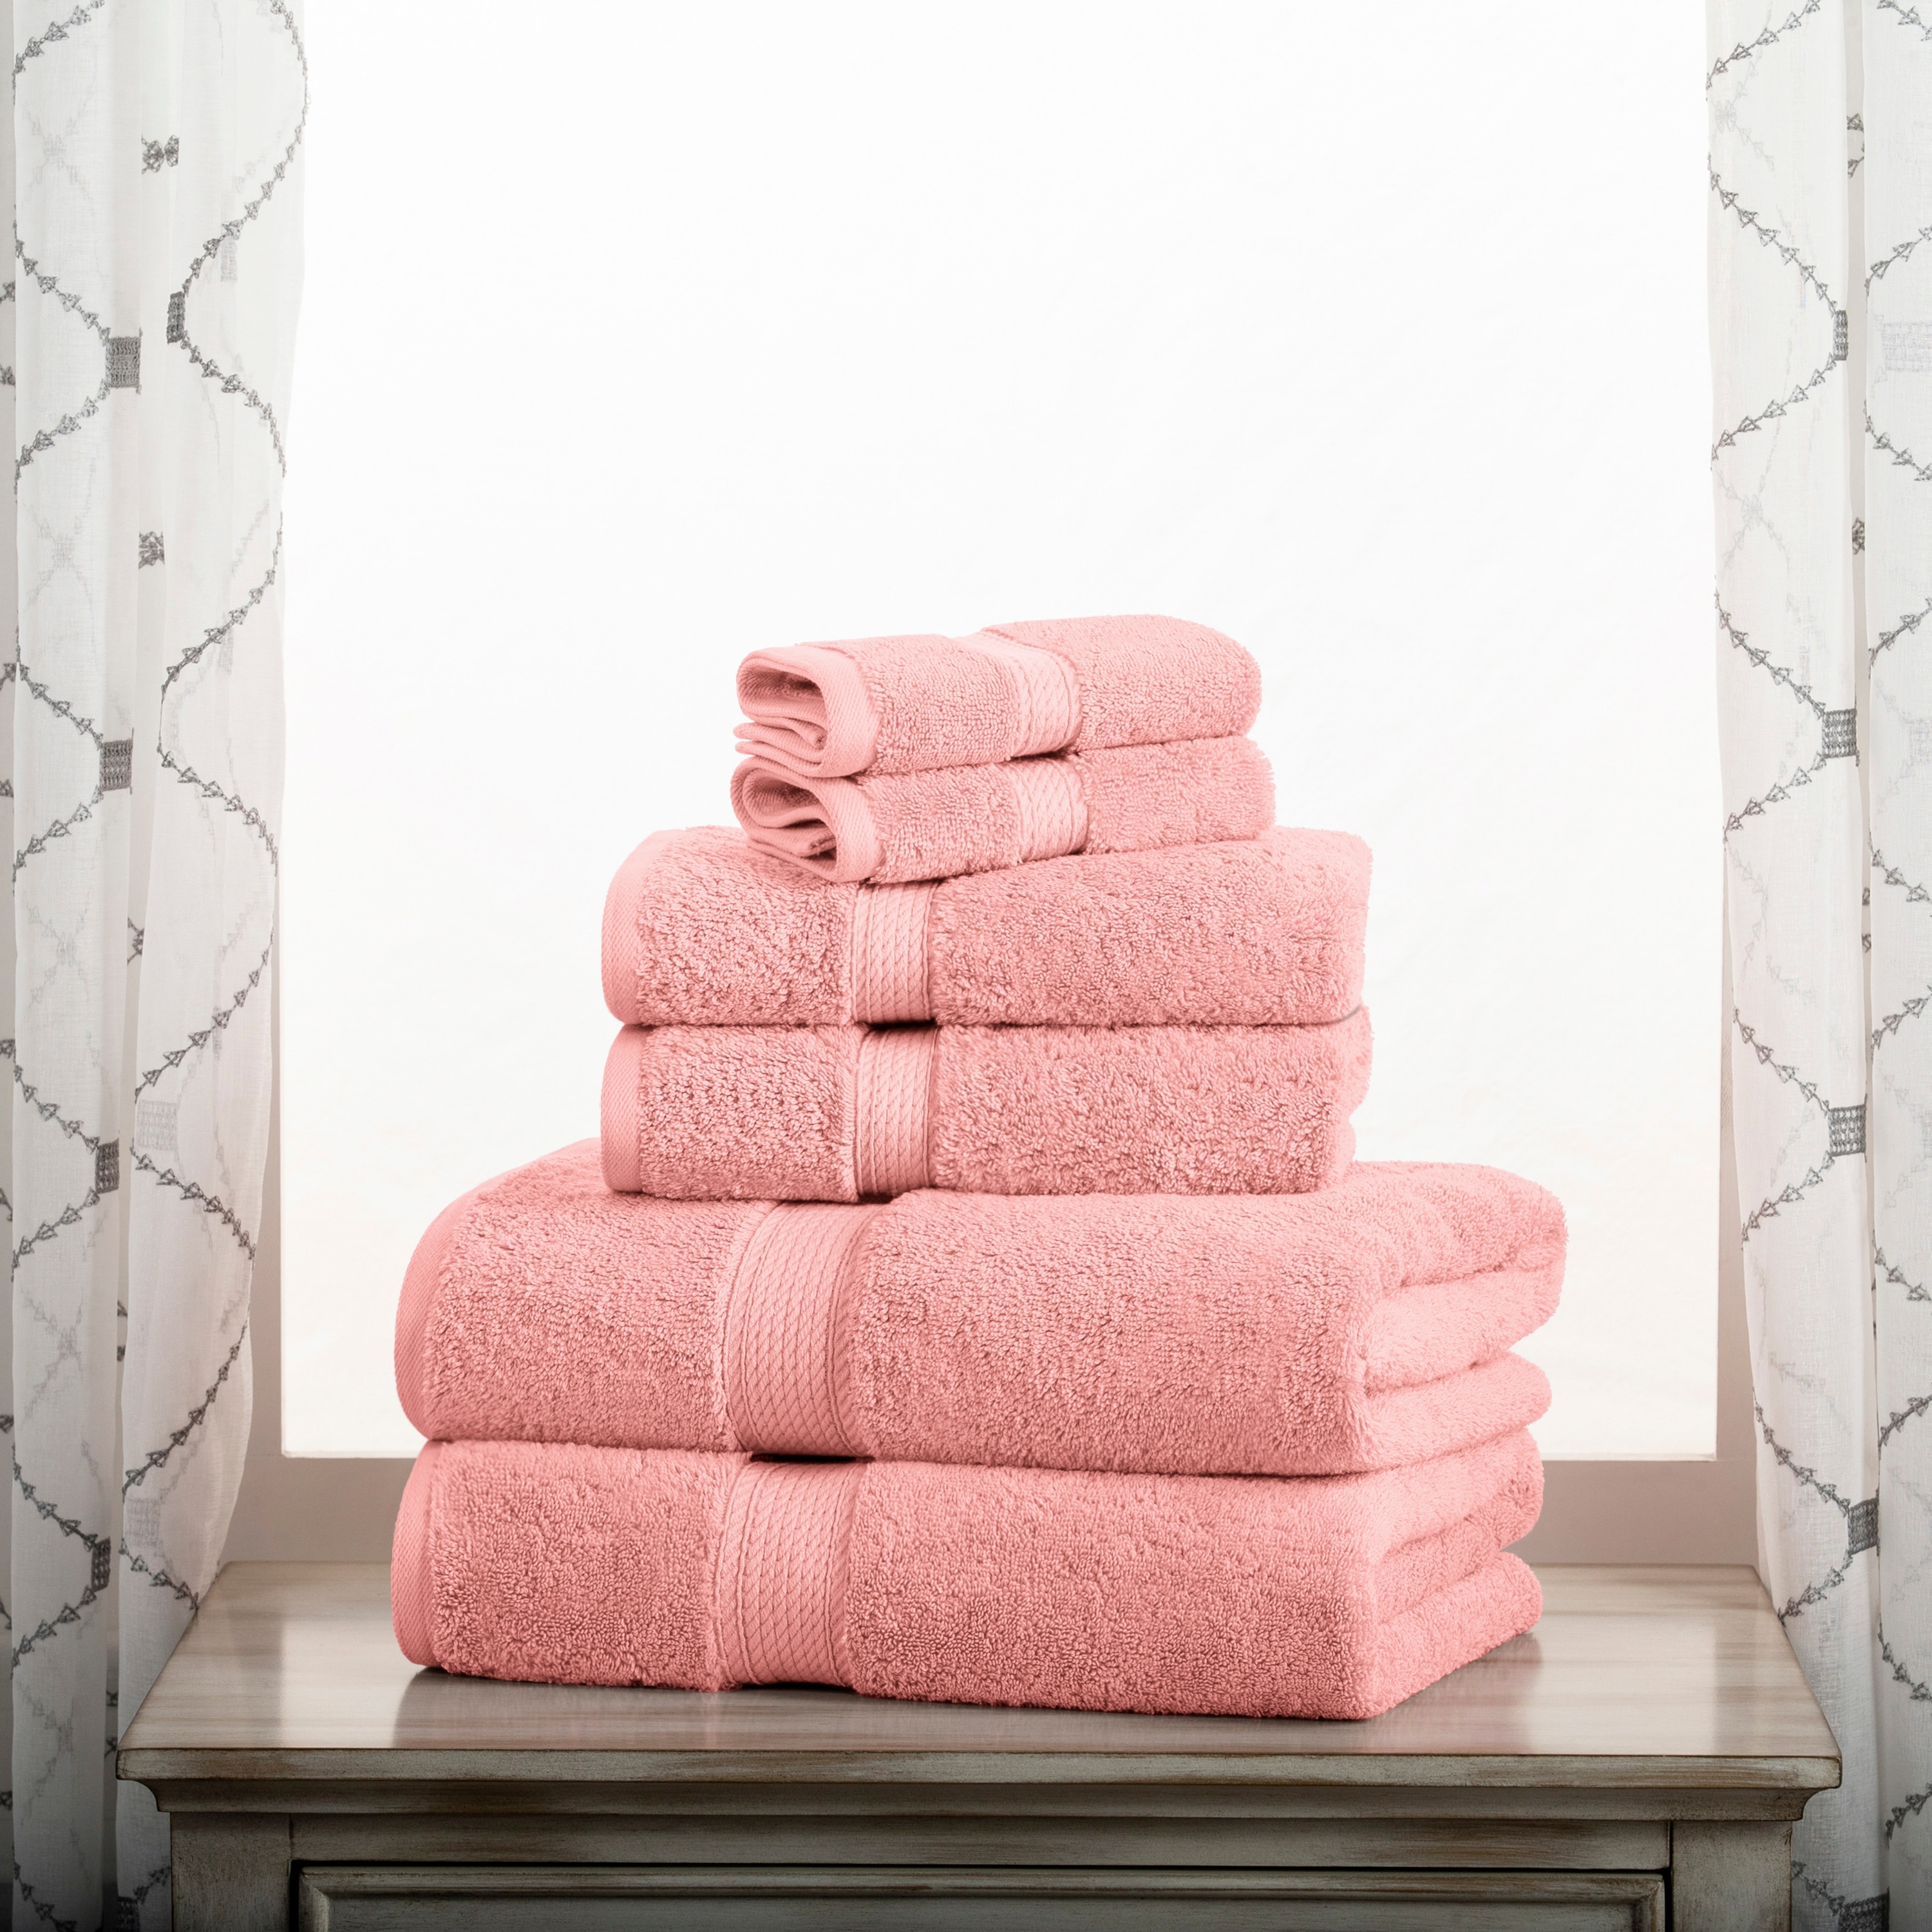 https://ak1.ostkcdn.com/images/products/is/images/direct/d7ed7ed9cc56c1736002dc899c420af395bf951f/Egyptian-Cotton-Heavyweight-Solid-Plush-Towel-Set-by-Superior.jpg